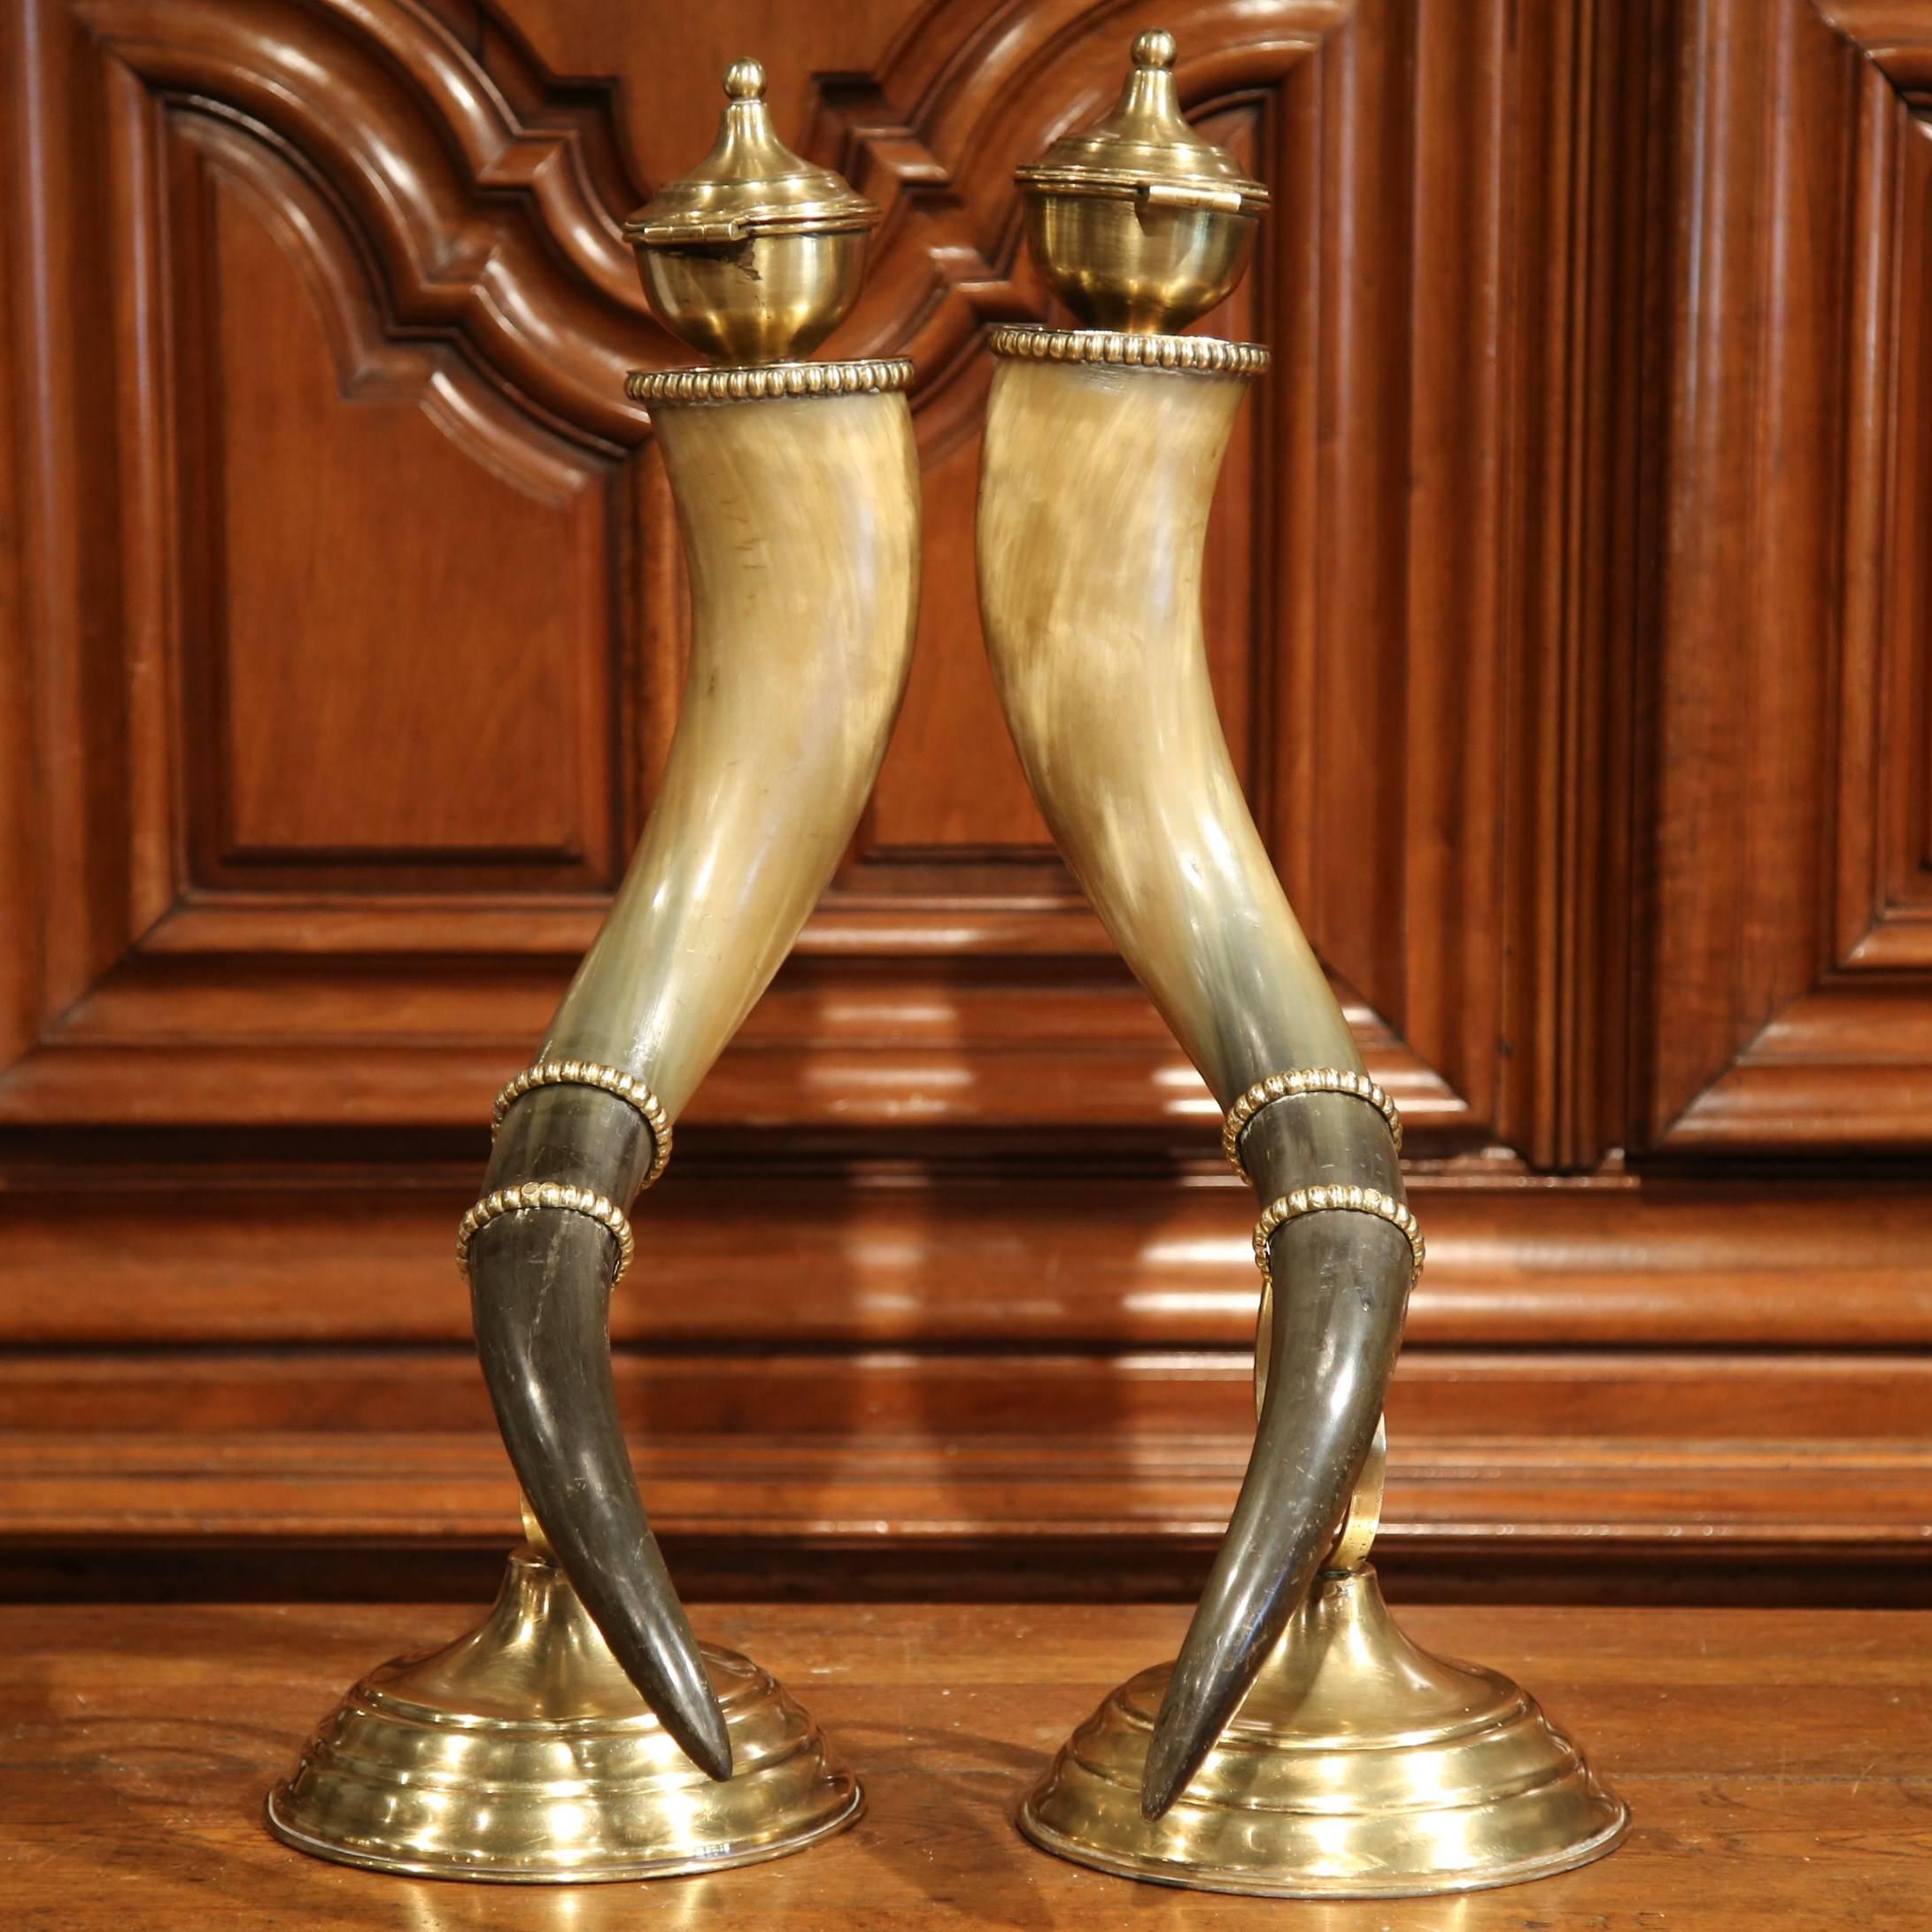 These large, antique drinking horns on stand were crafted in France, circa 1880. Each curved cornucopia dressed with brass ending and lid, is mounted on a round brass stands. The brass additions are decorative, and the lids resemble classical urns.